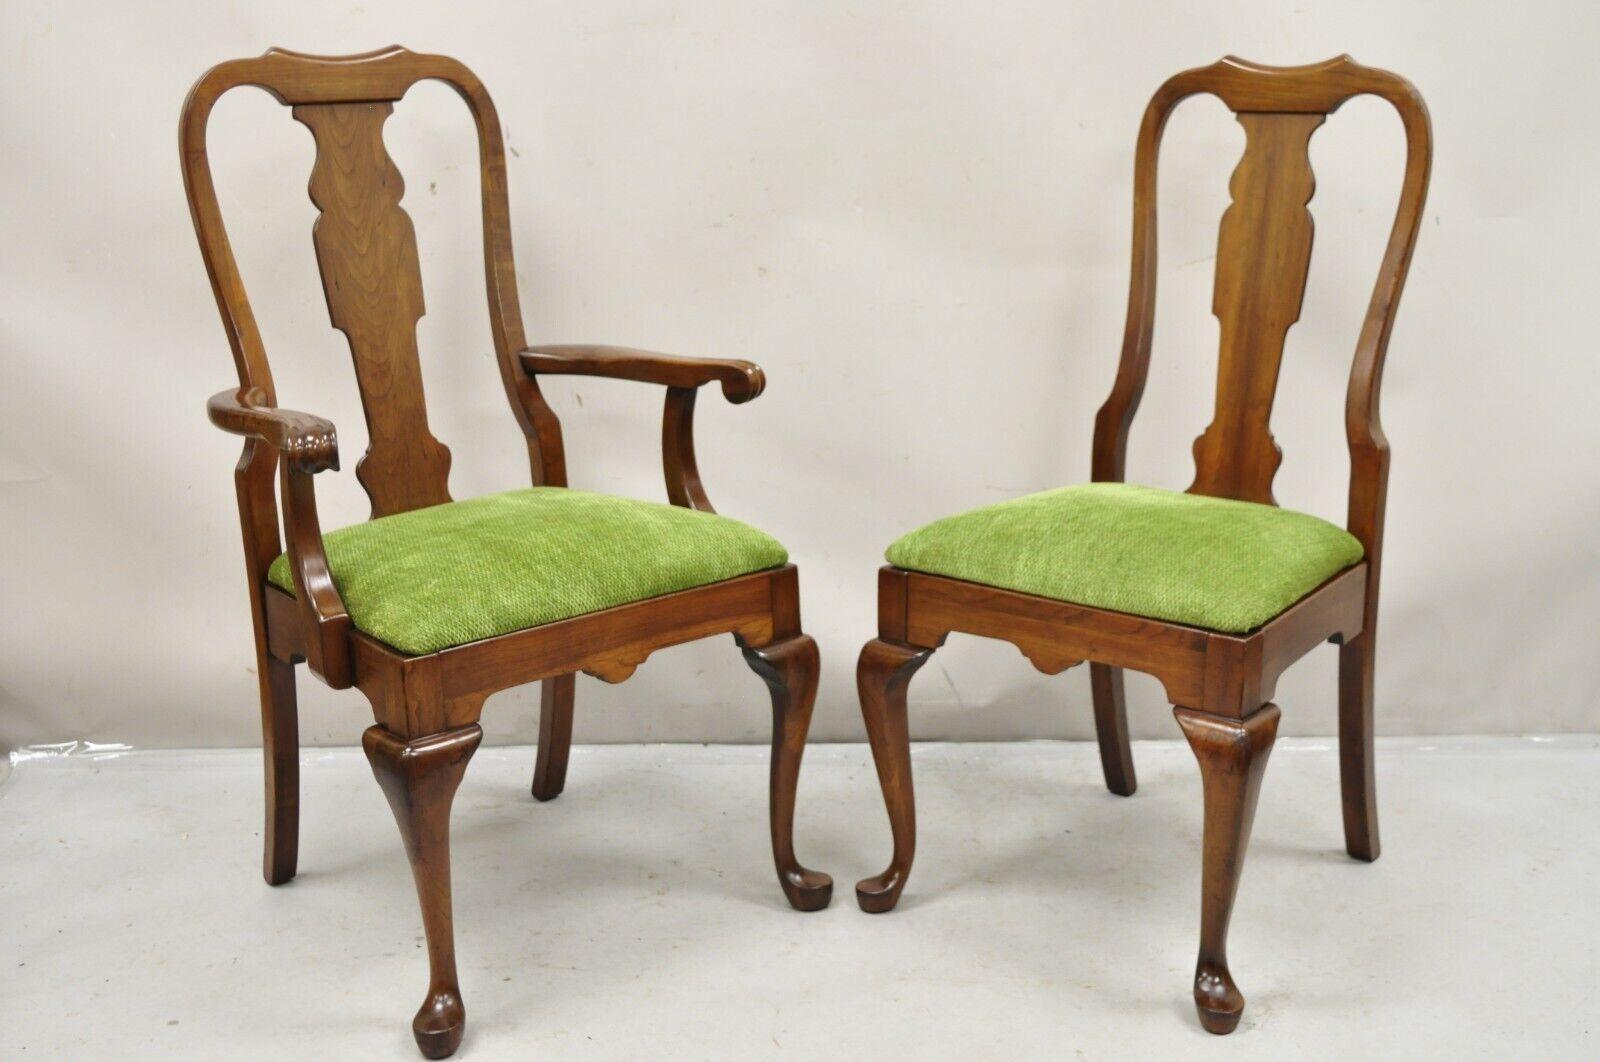 Pennsylvania House Cherry Wood Queen Anne Style T-Back Dining Chairs - Set of 8. Item feartures (2) Armchairs (6) side chairs, solid cherry wood frames, Queen Anne legs, original stamp, quality American  l'artisanat. Milieu et fin du 20e